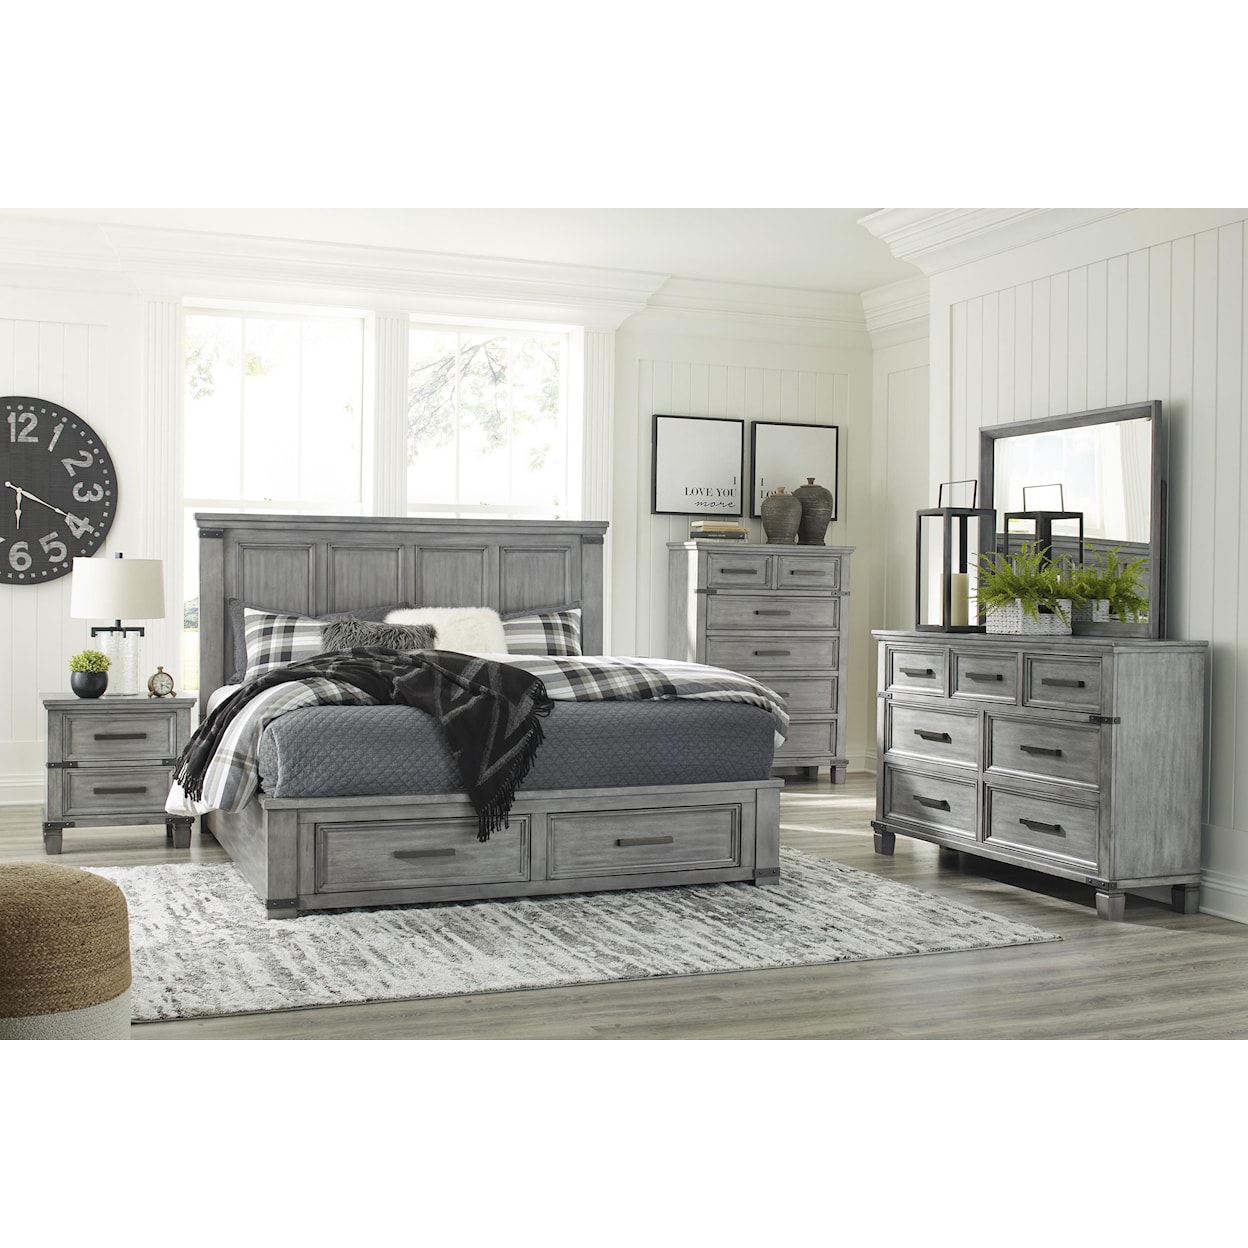 Signature Design by Ashley Russelyn 5 Piece King Bedroom Set